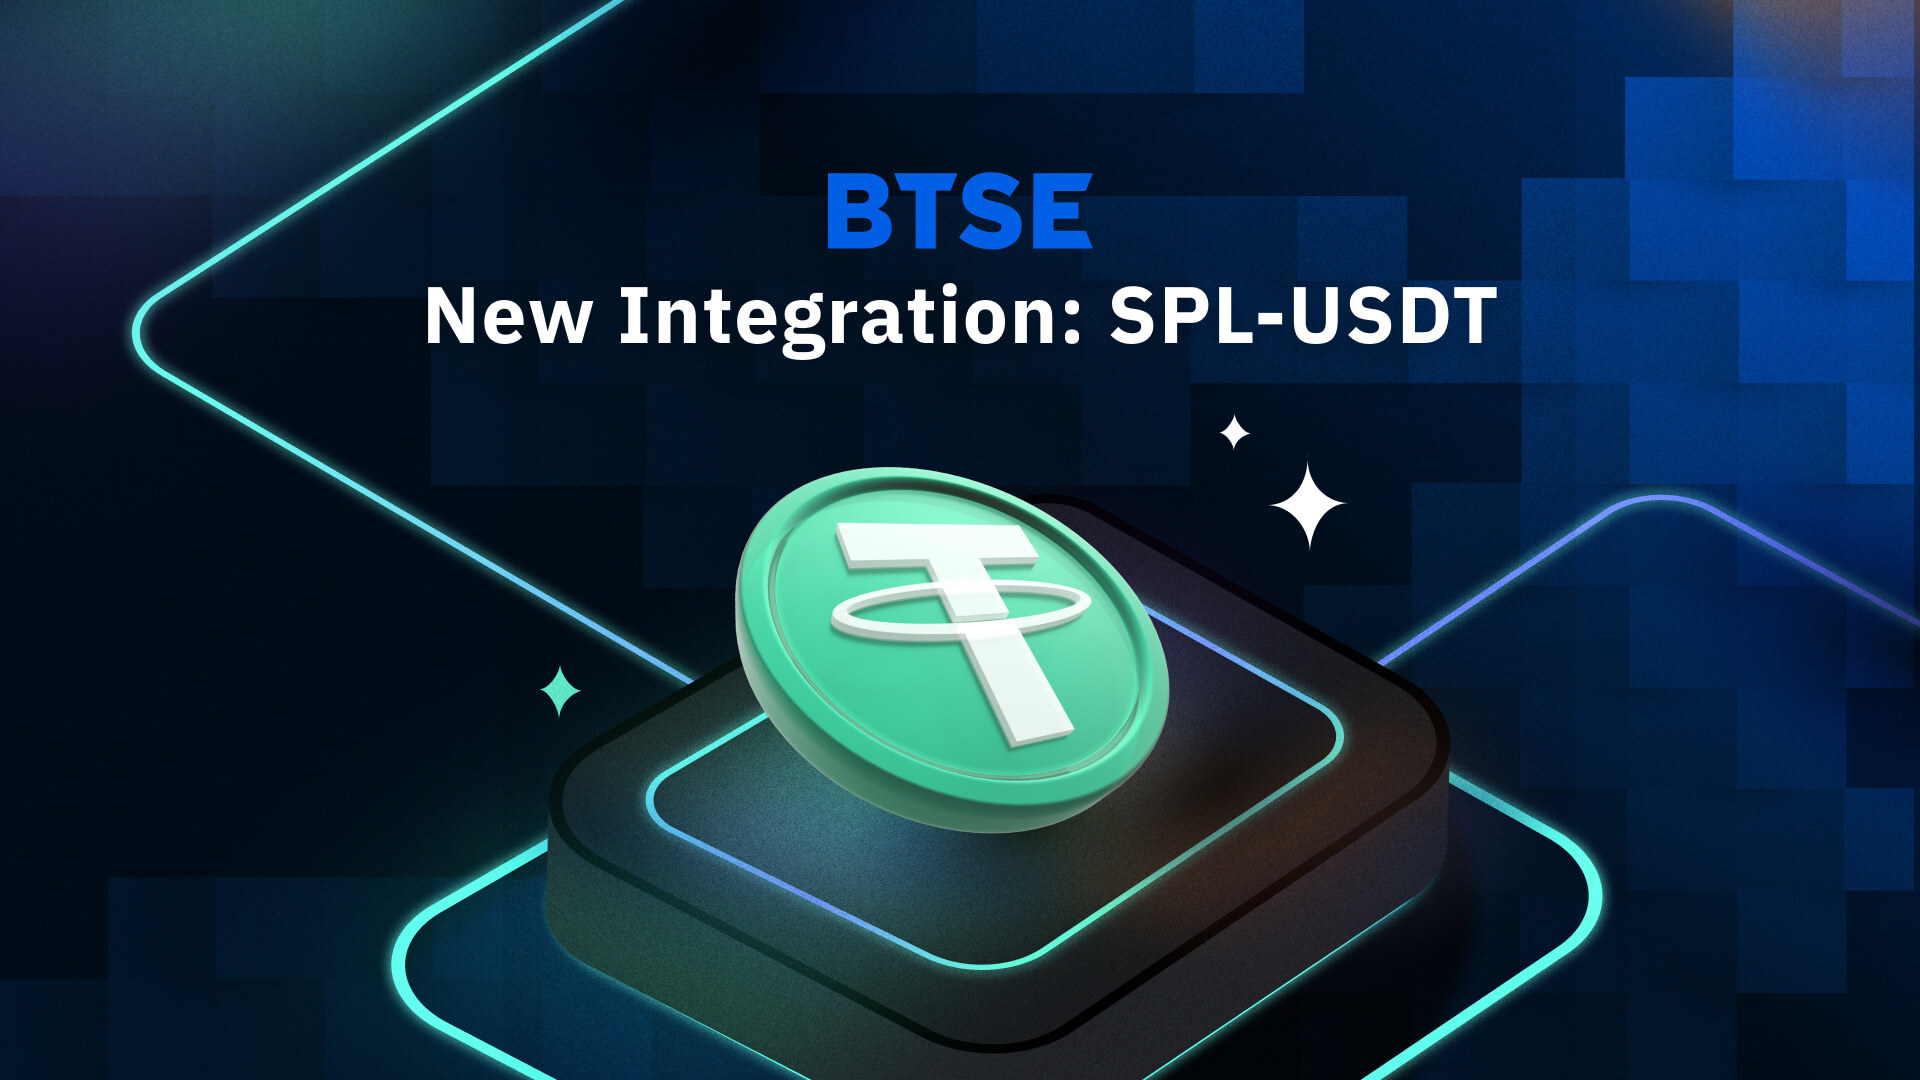 BTSE Integrates SPL-USDT, Enables Deposits and Withdrawals on the Solana Chain